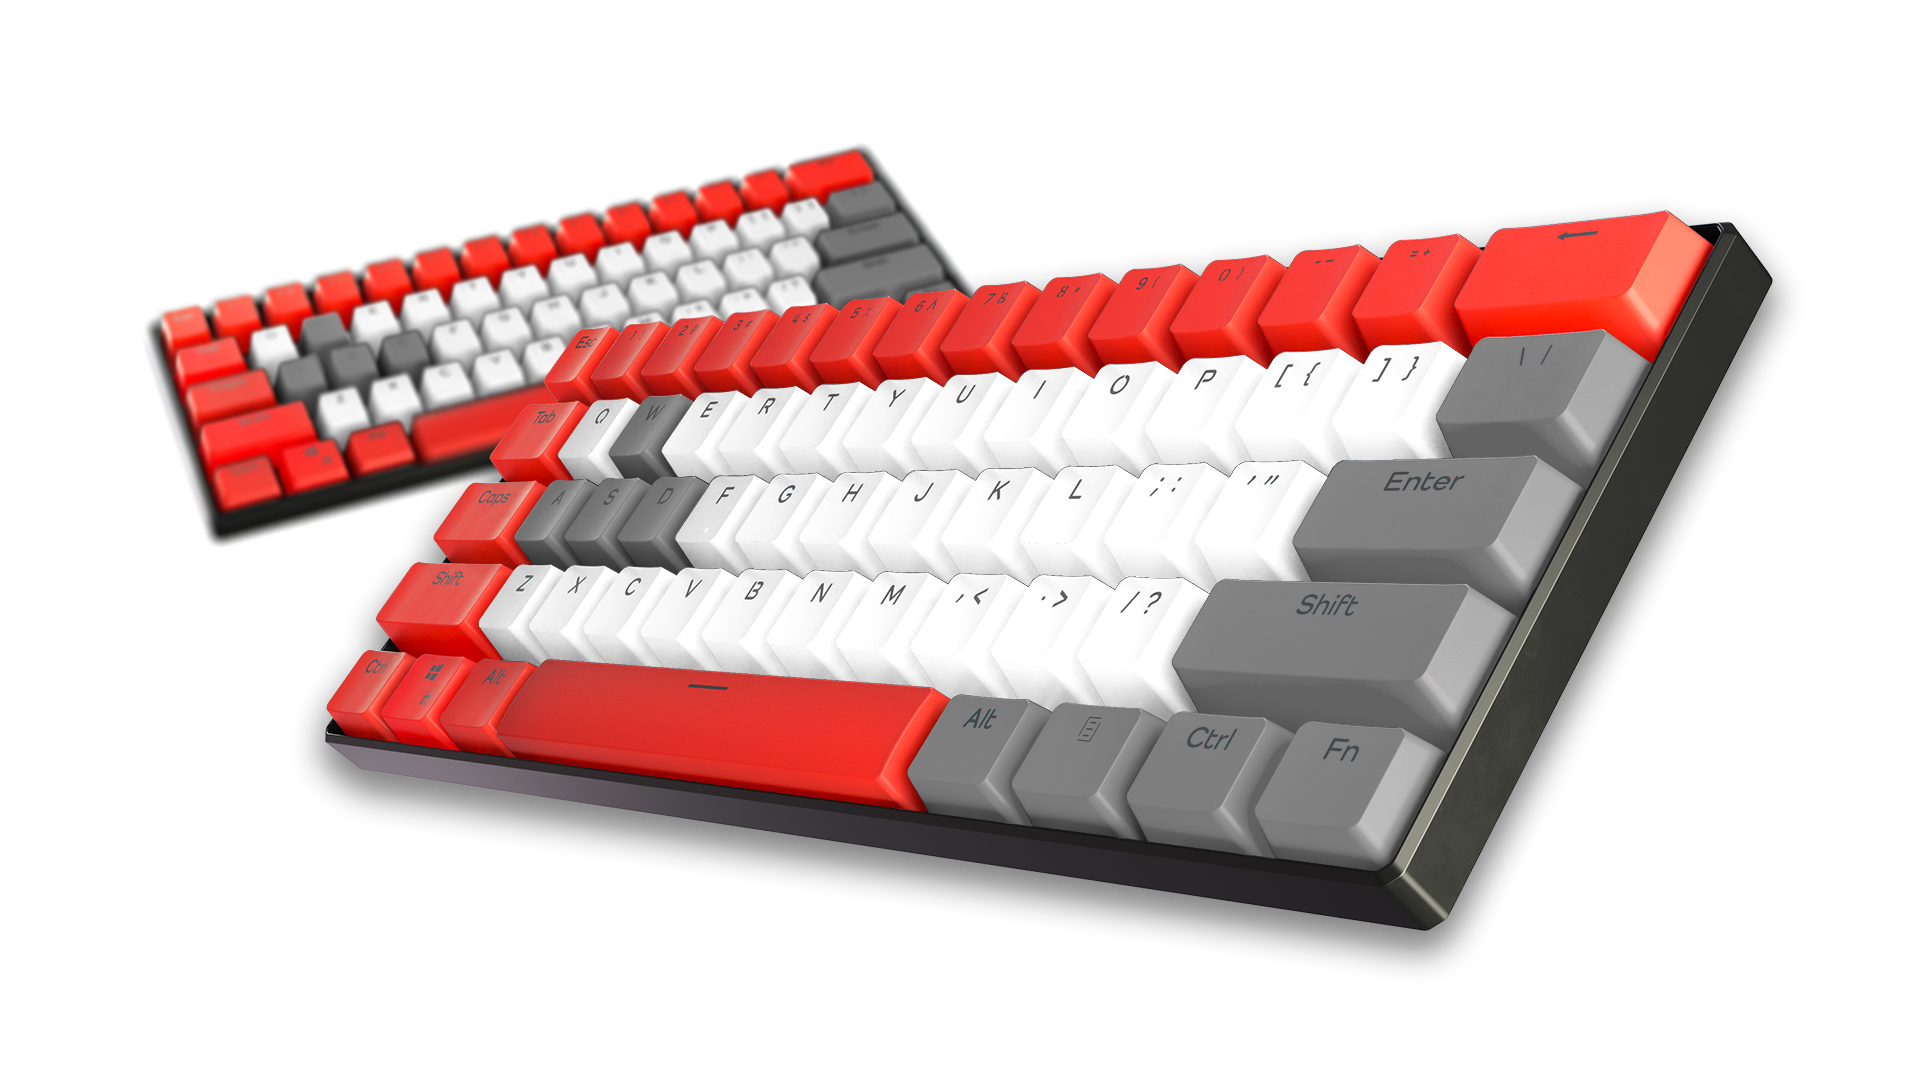 mid out - AltCustomsKeyboards